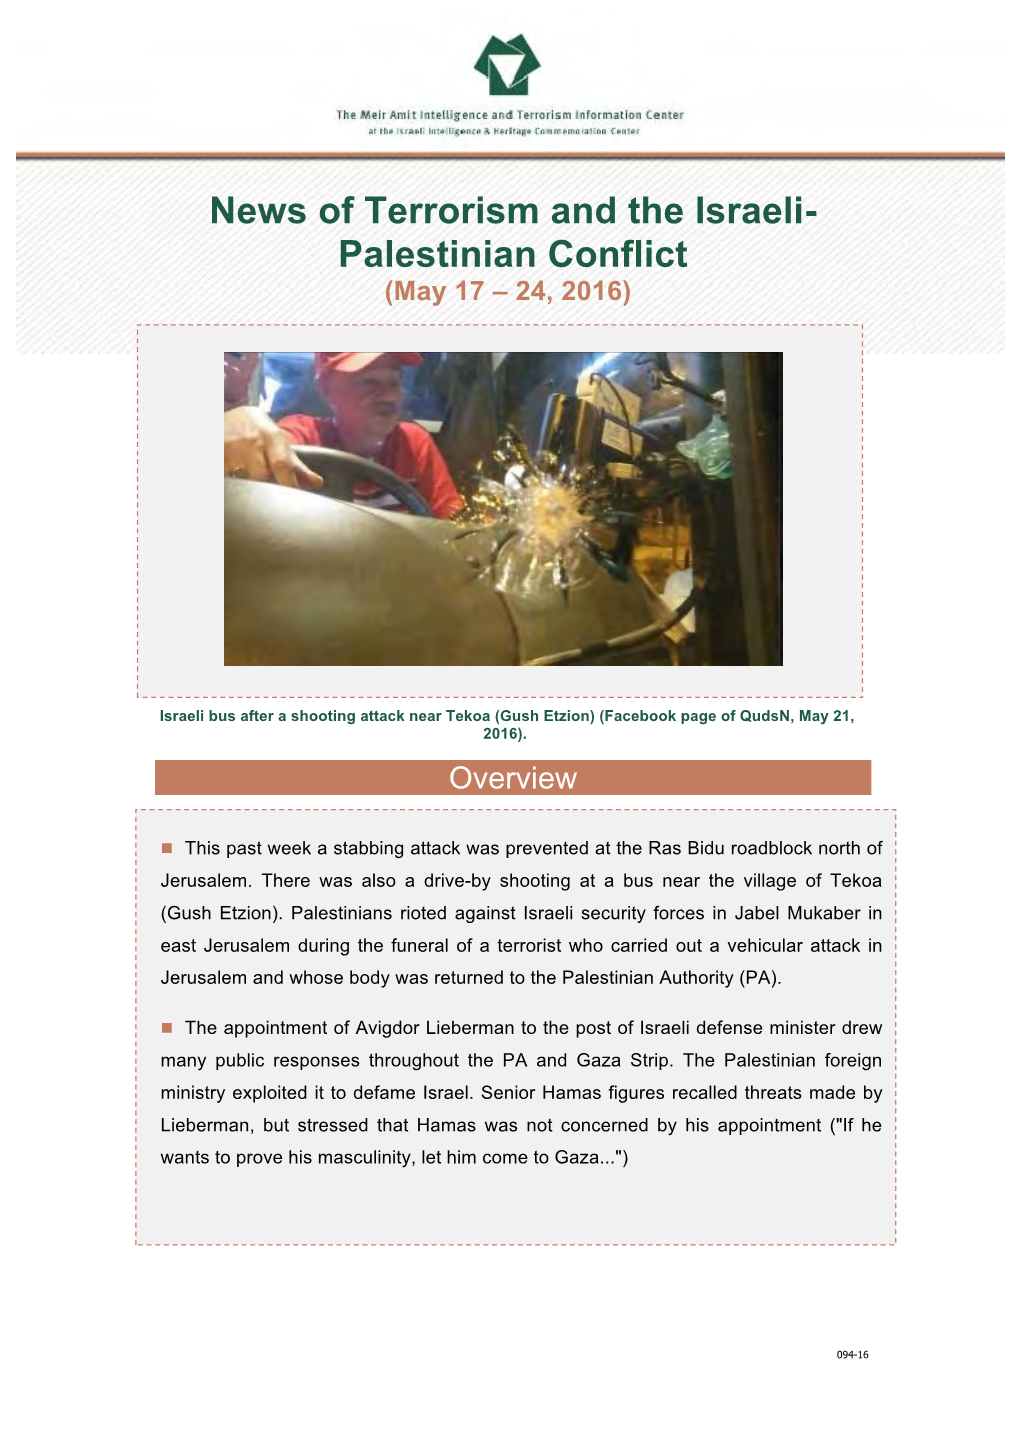 News of Terrorism and the Israeli-Palestinian Conflict (May 17